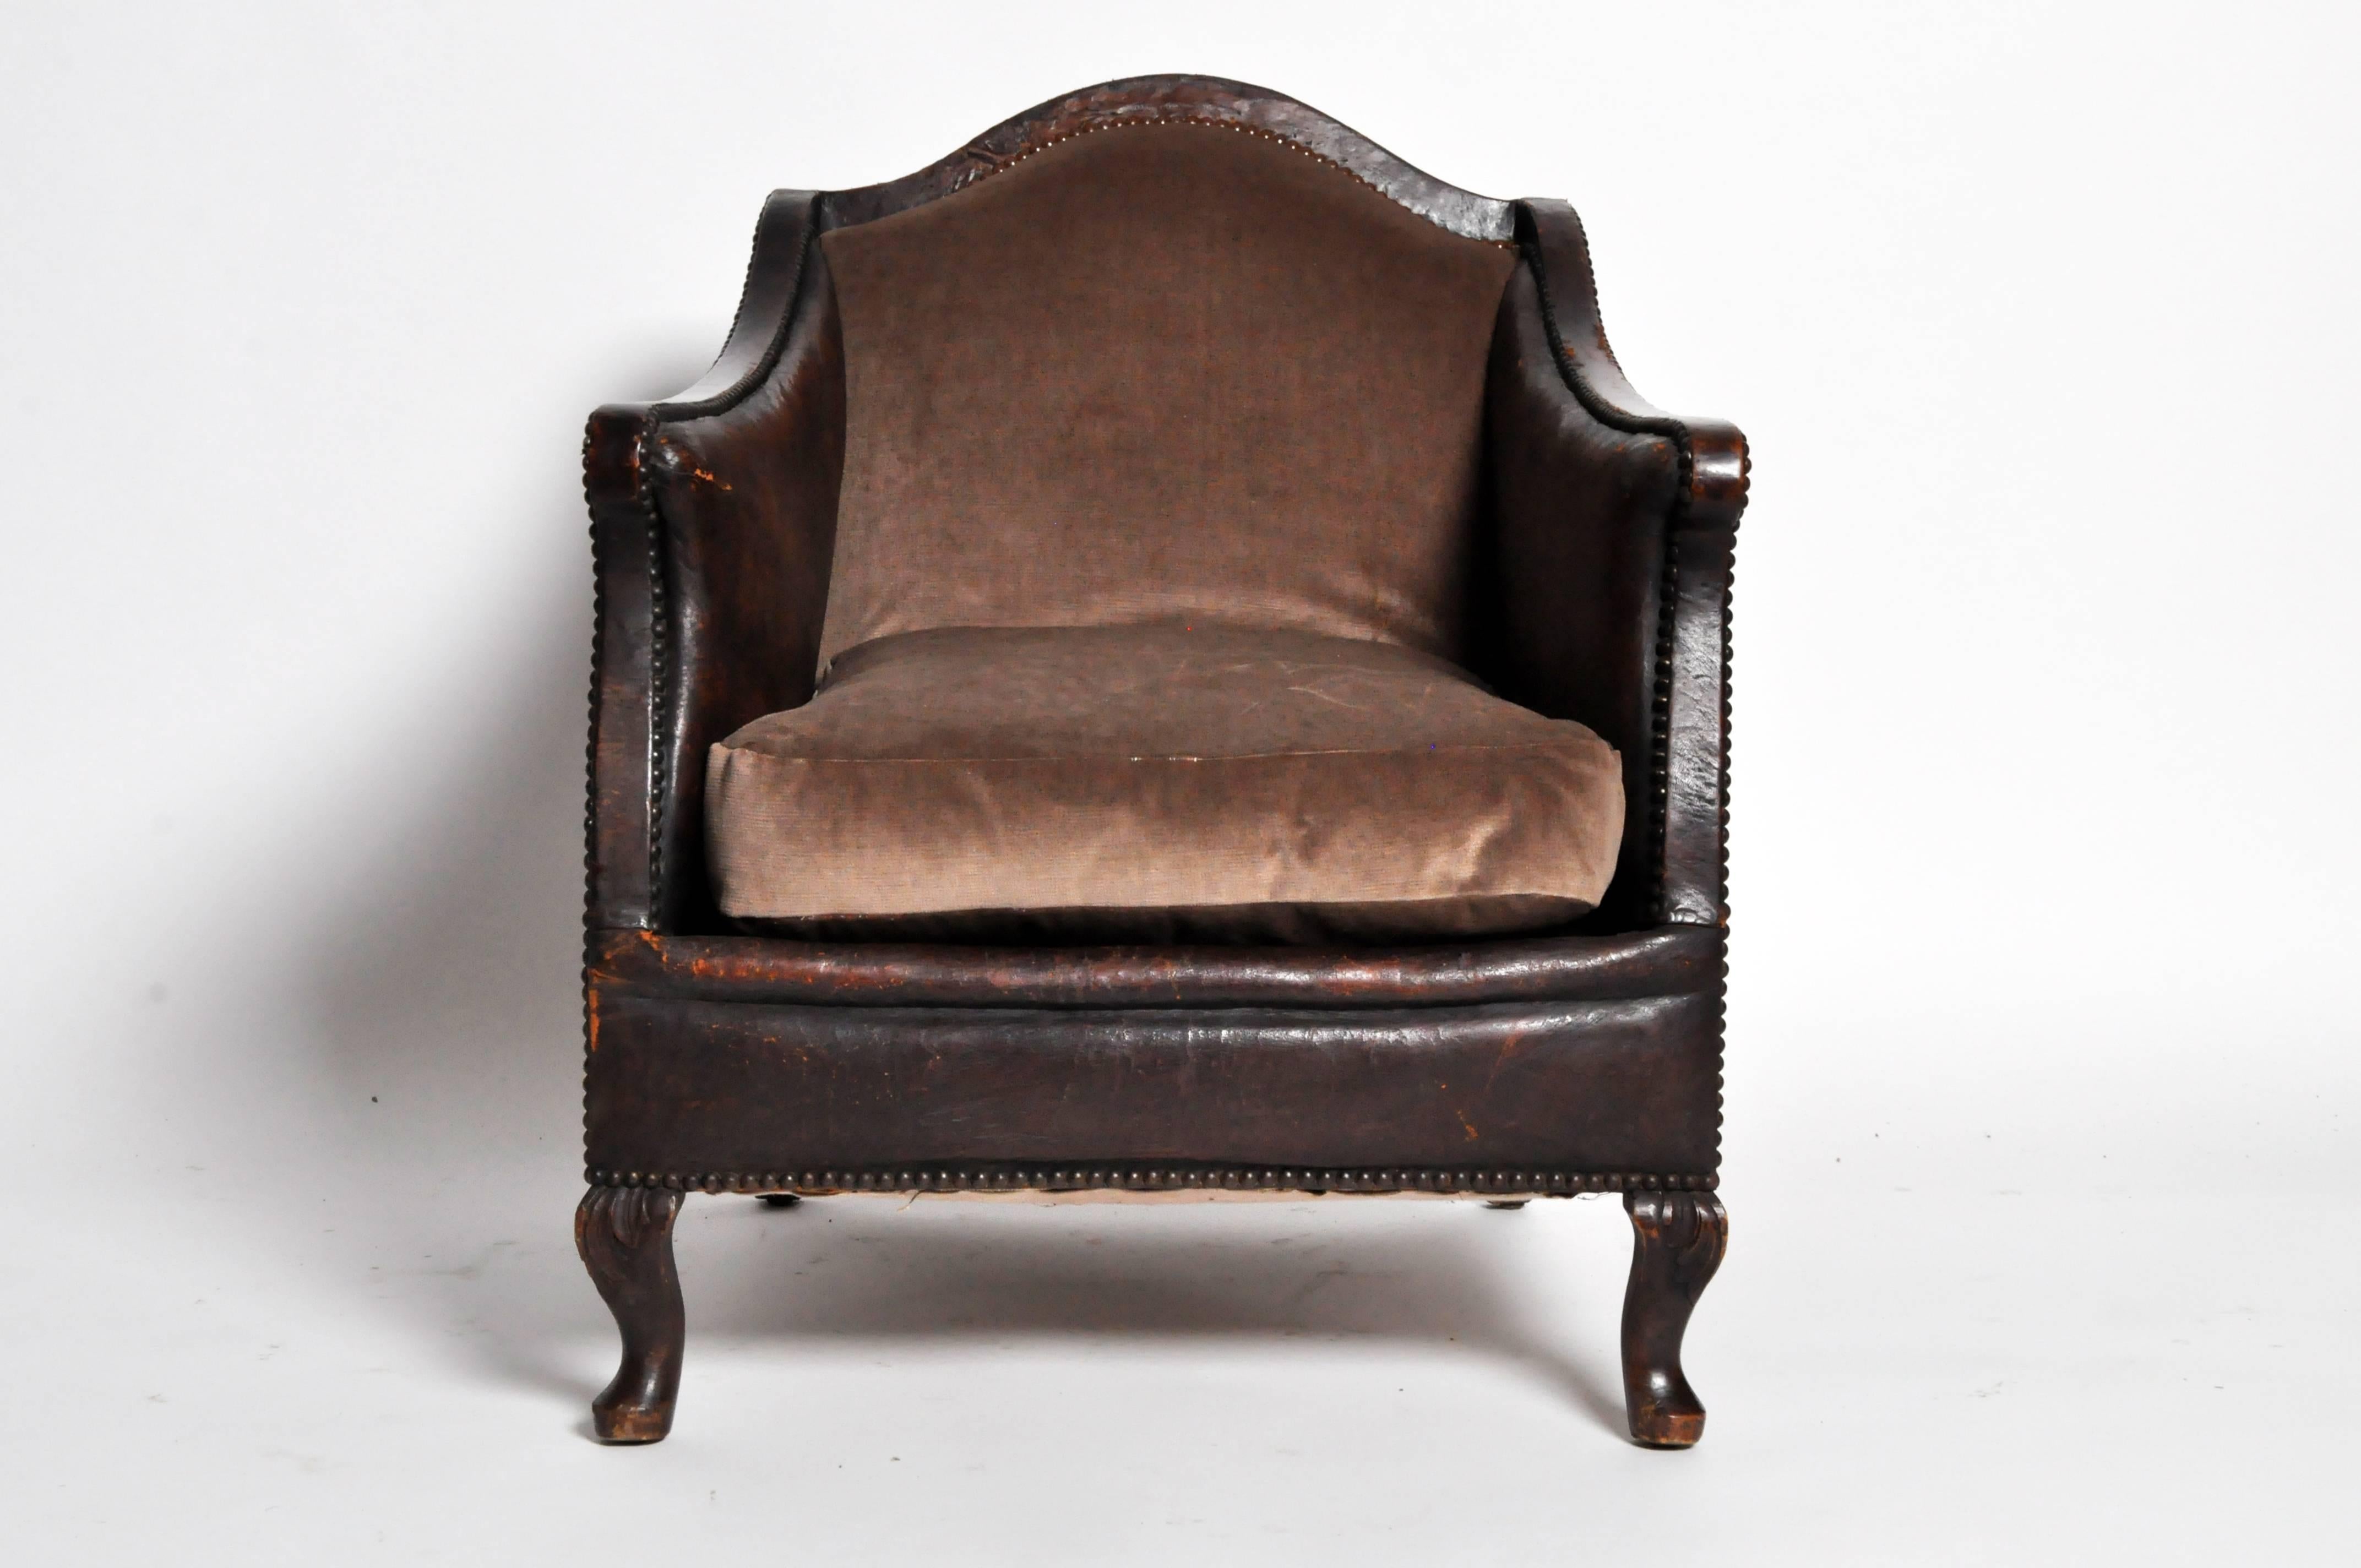 This handsome pair of leather armchairs are from France and are made from leather and cotton velvet, circa 1930. The leather features a beautiful aged patina.